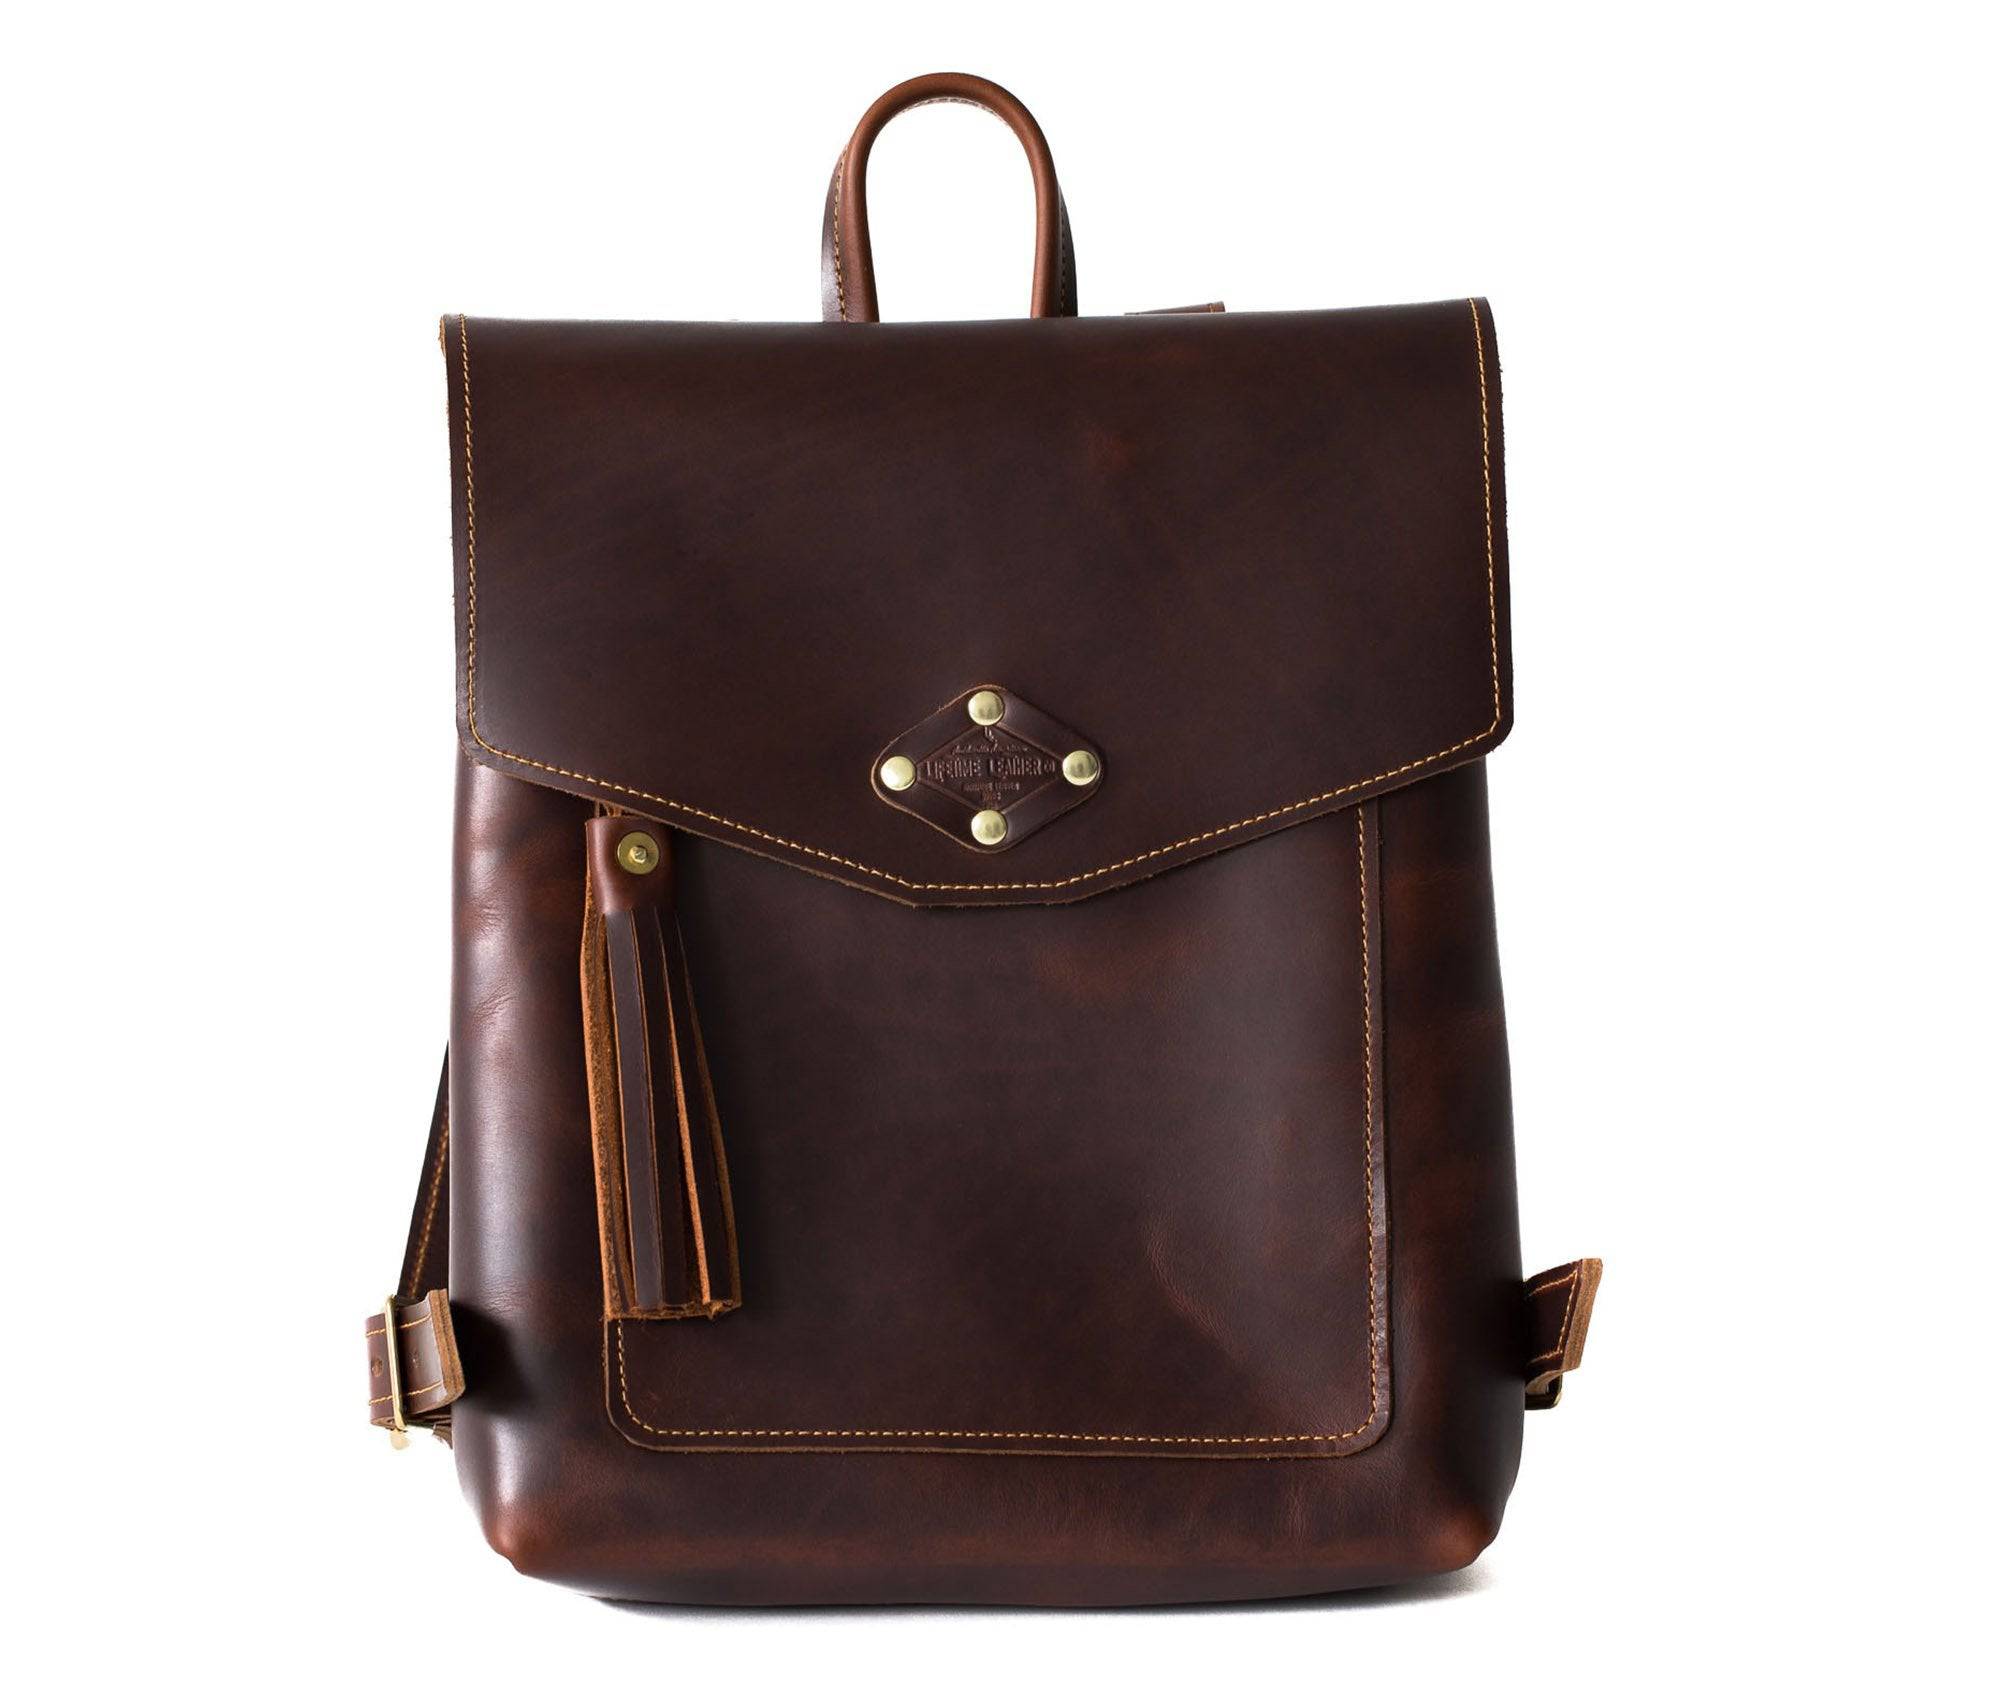  Leather Rucksack by Lifetime Leather Co Lifetime Leather Co Perfumarie